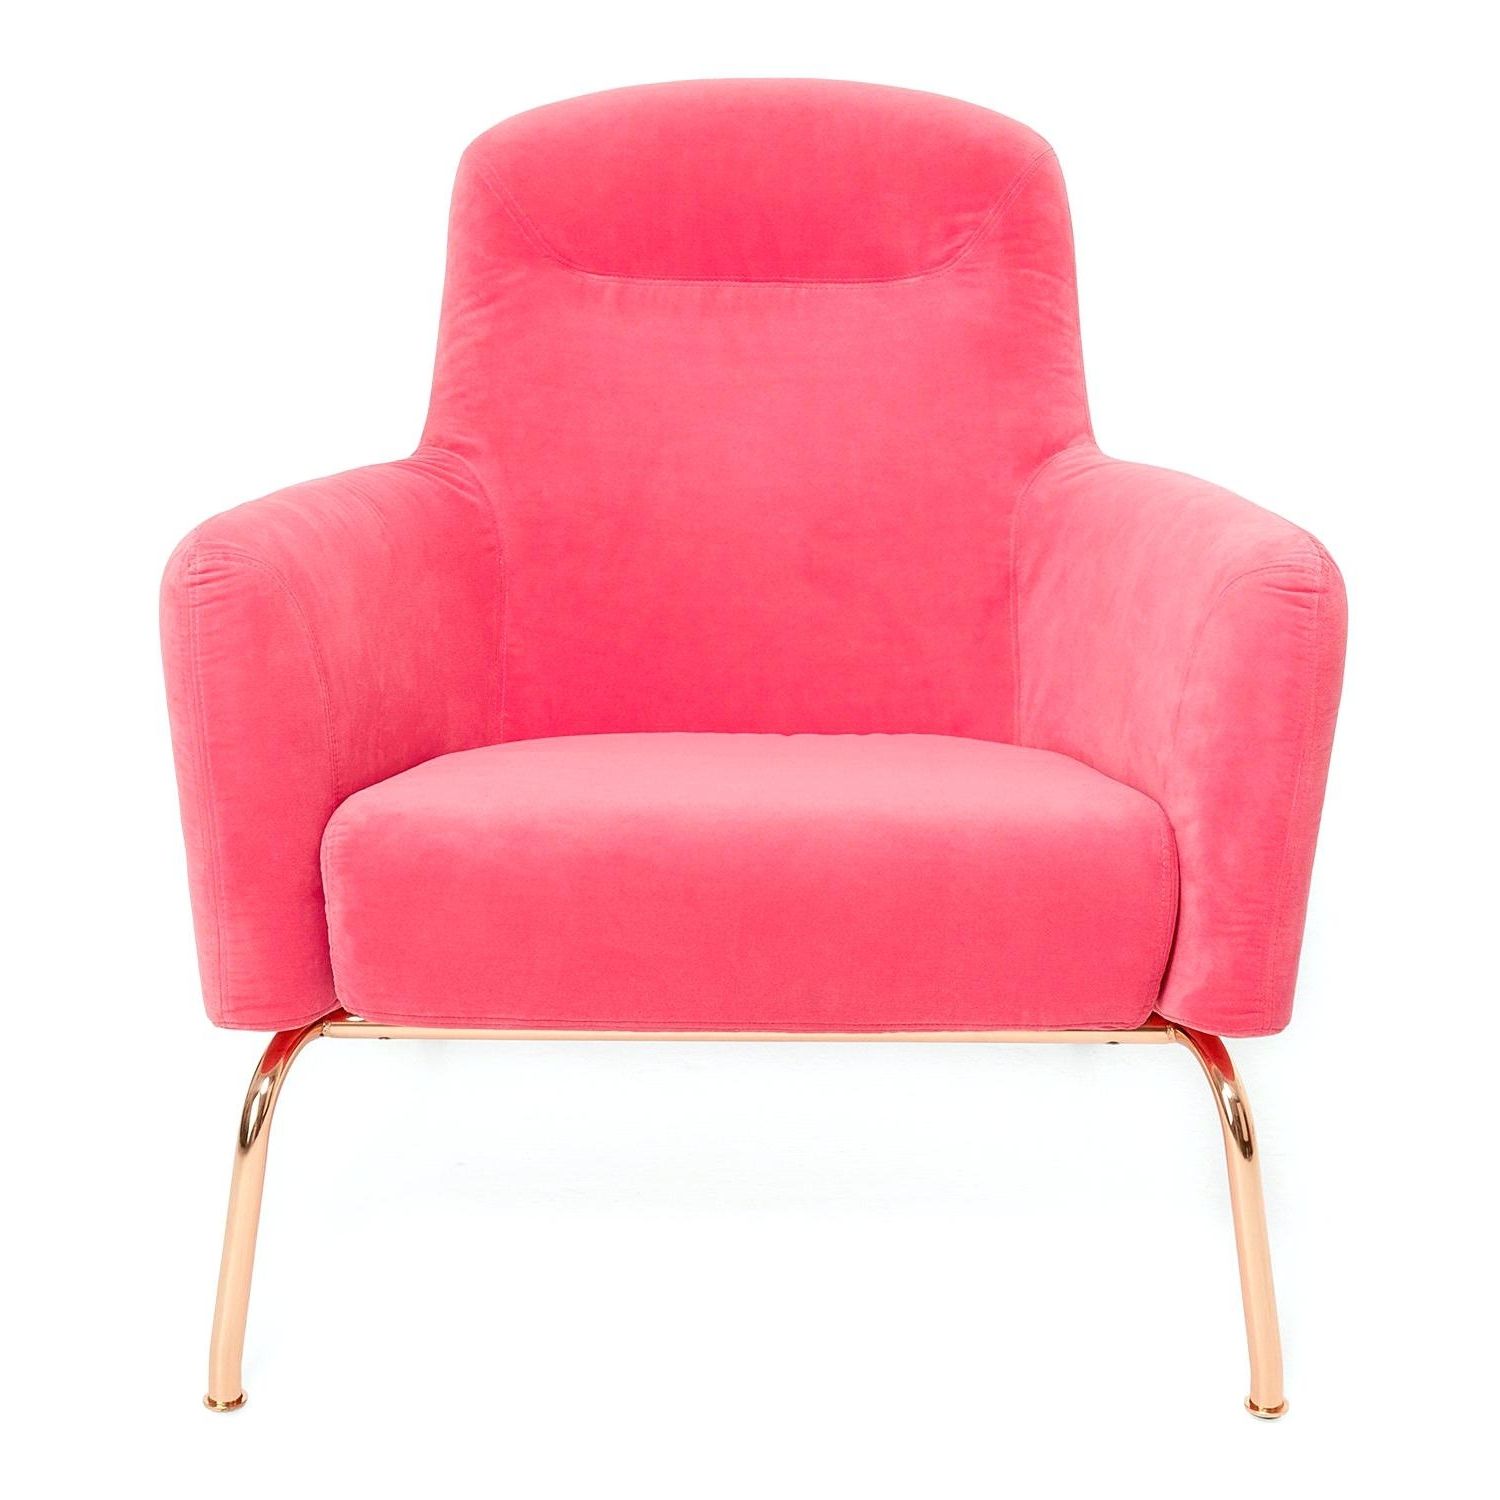 Reviravoltta Intended For Hot Pink Chaise Lounge Chairs (View 5 of 15)